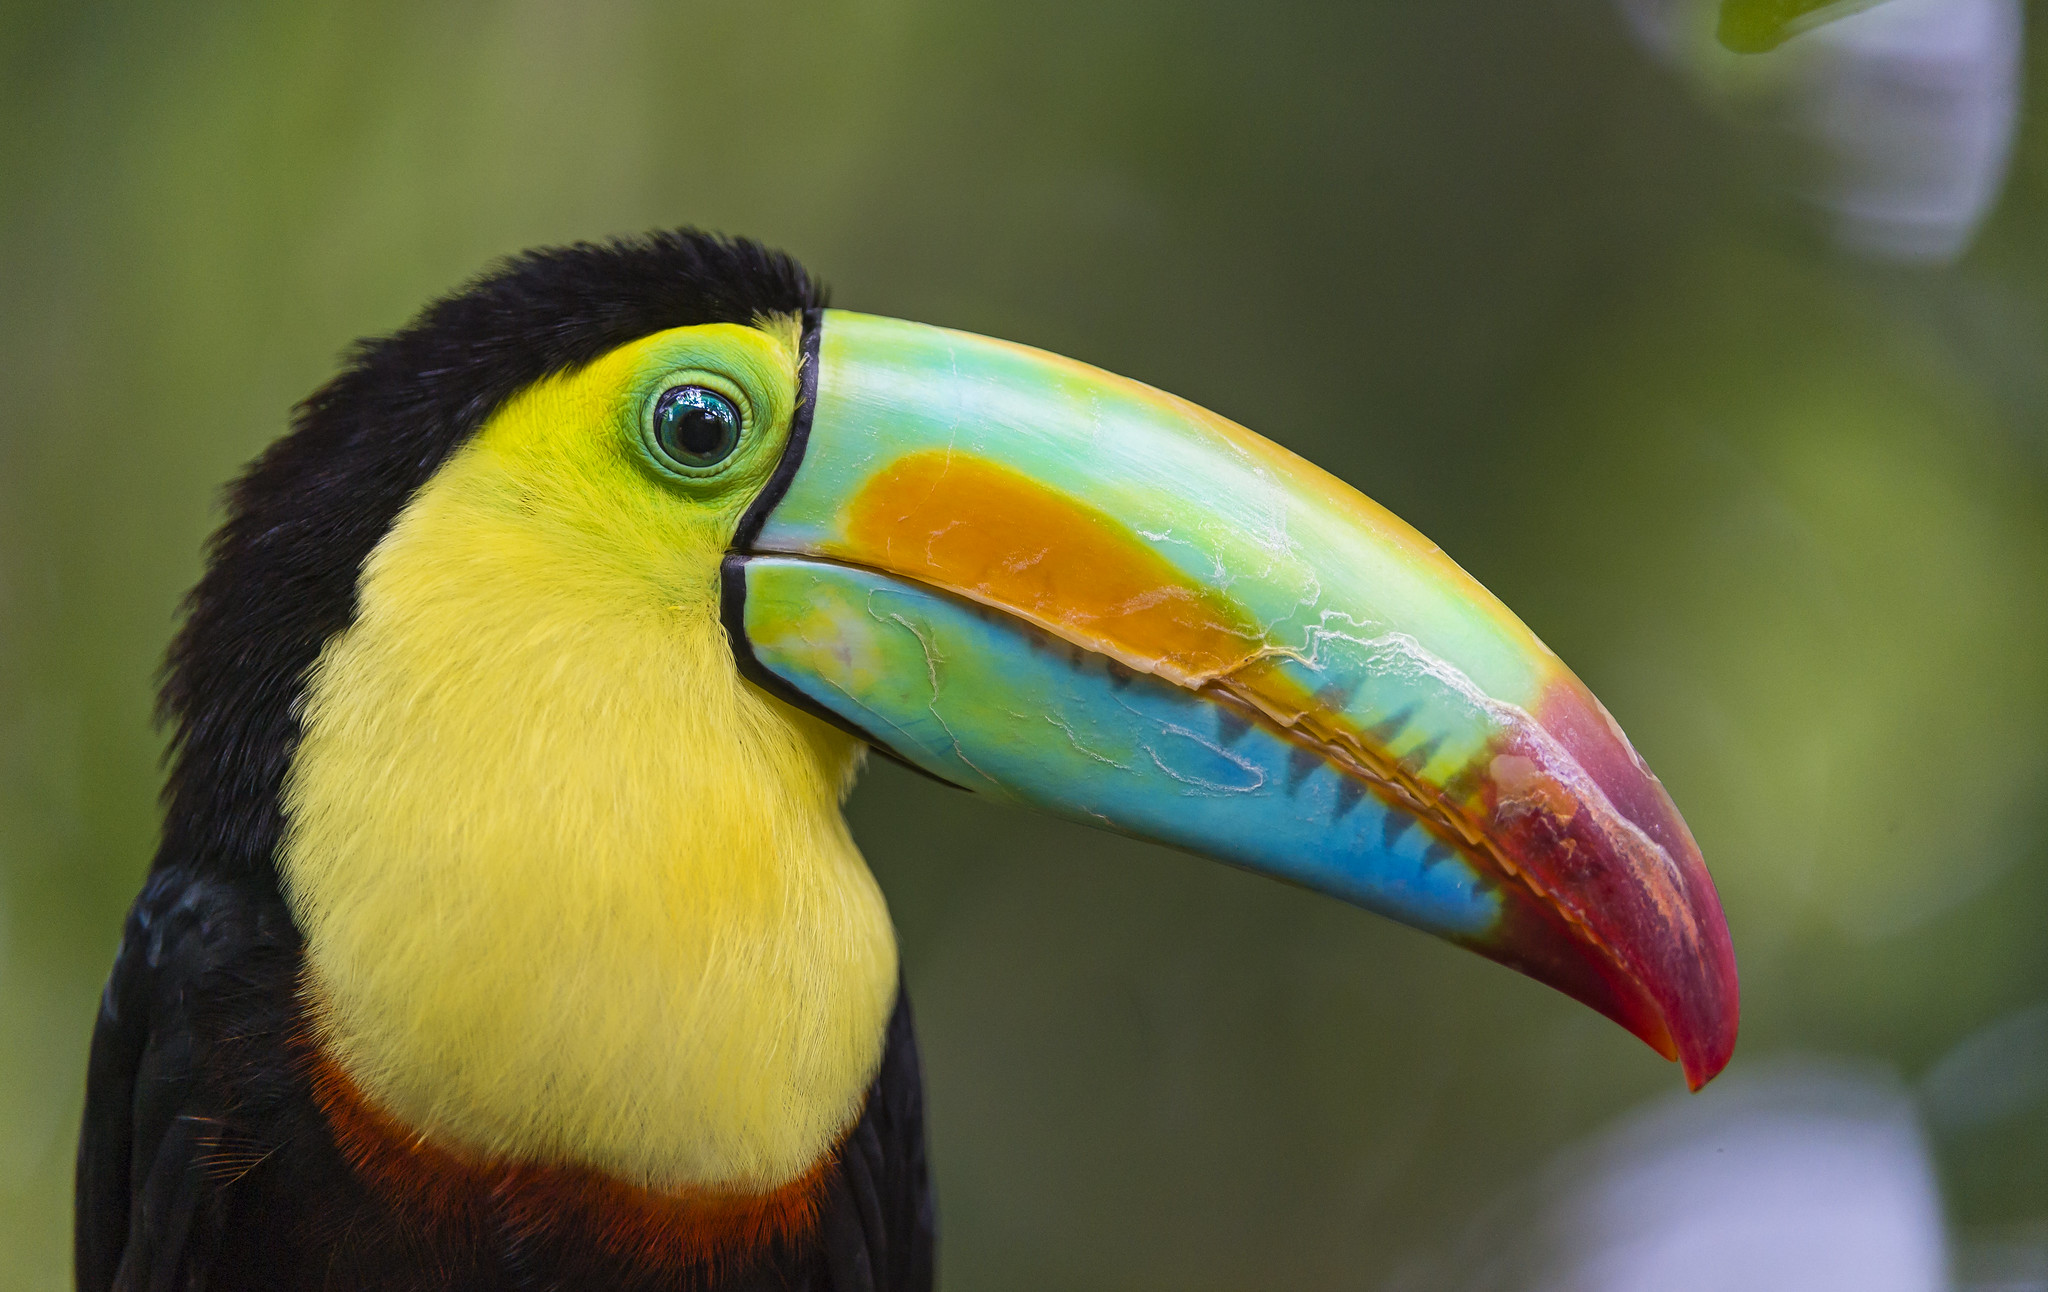 Toucan from the other side